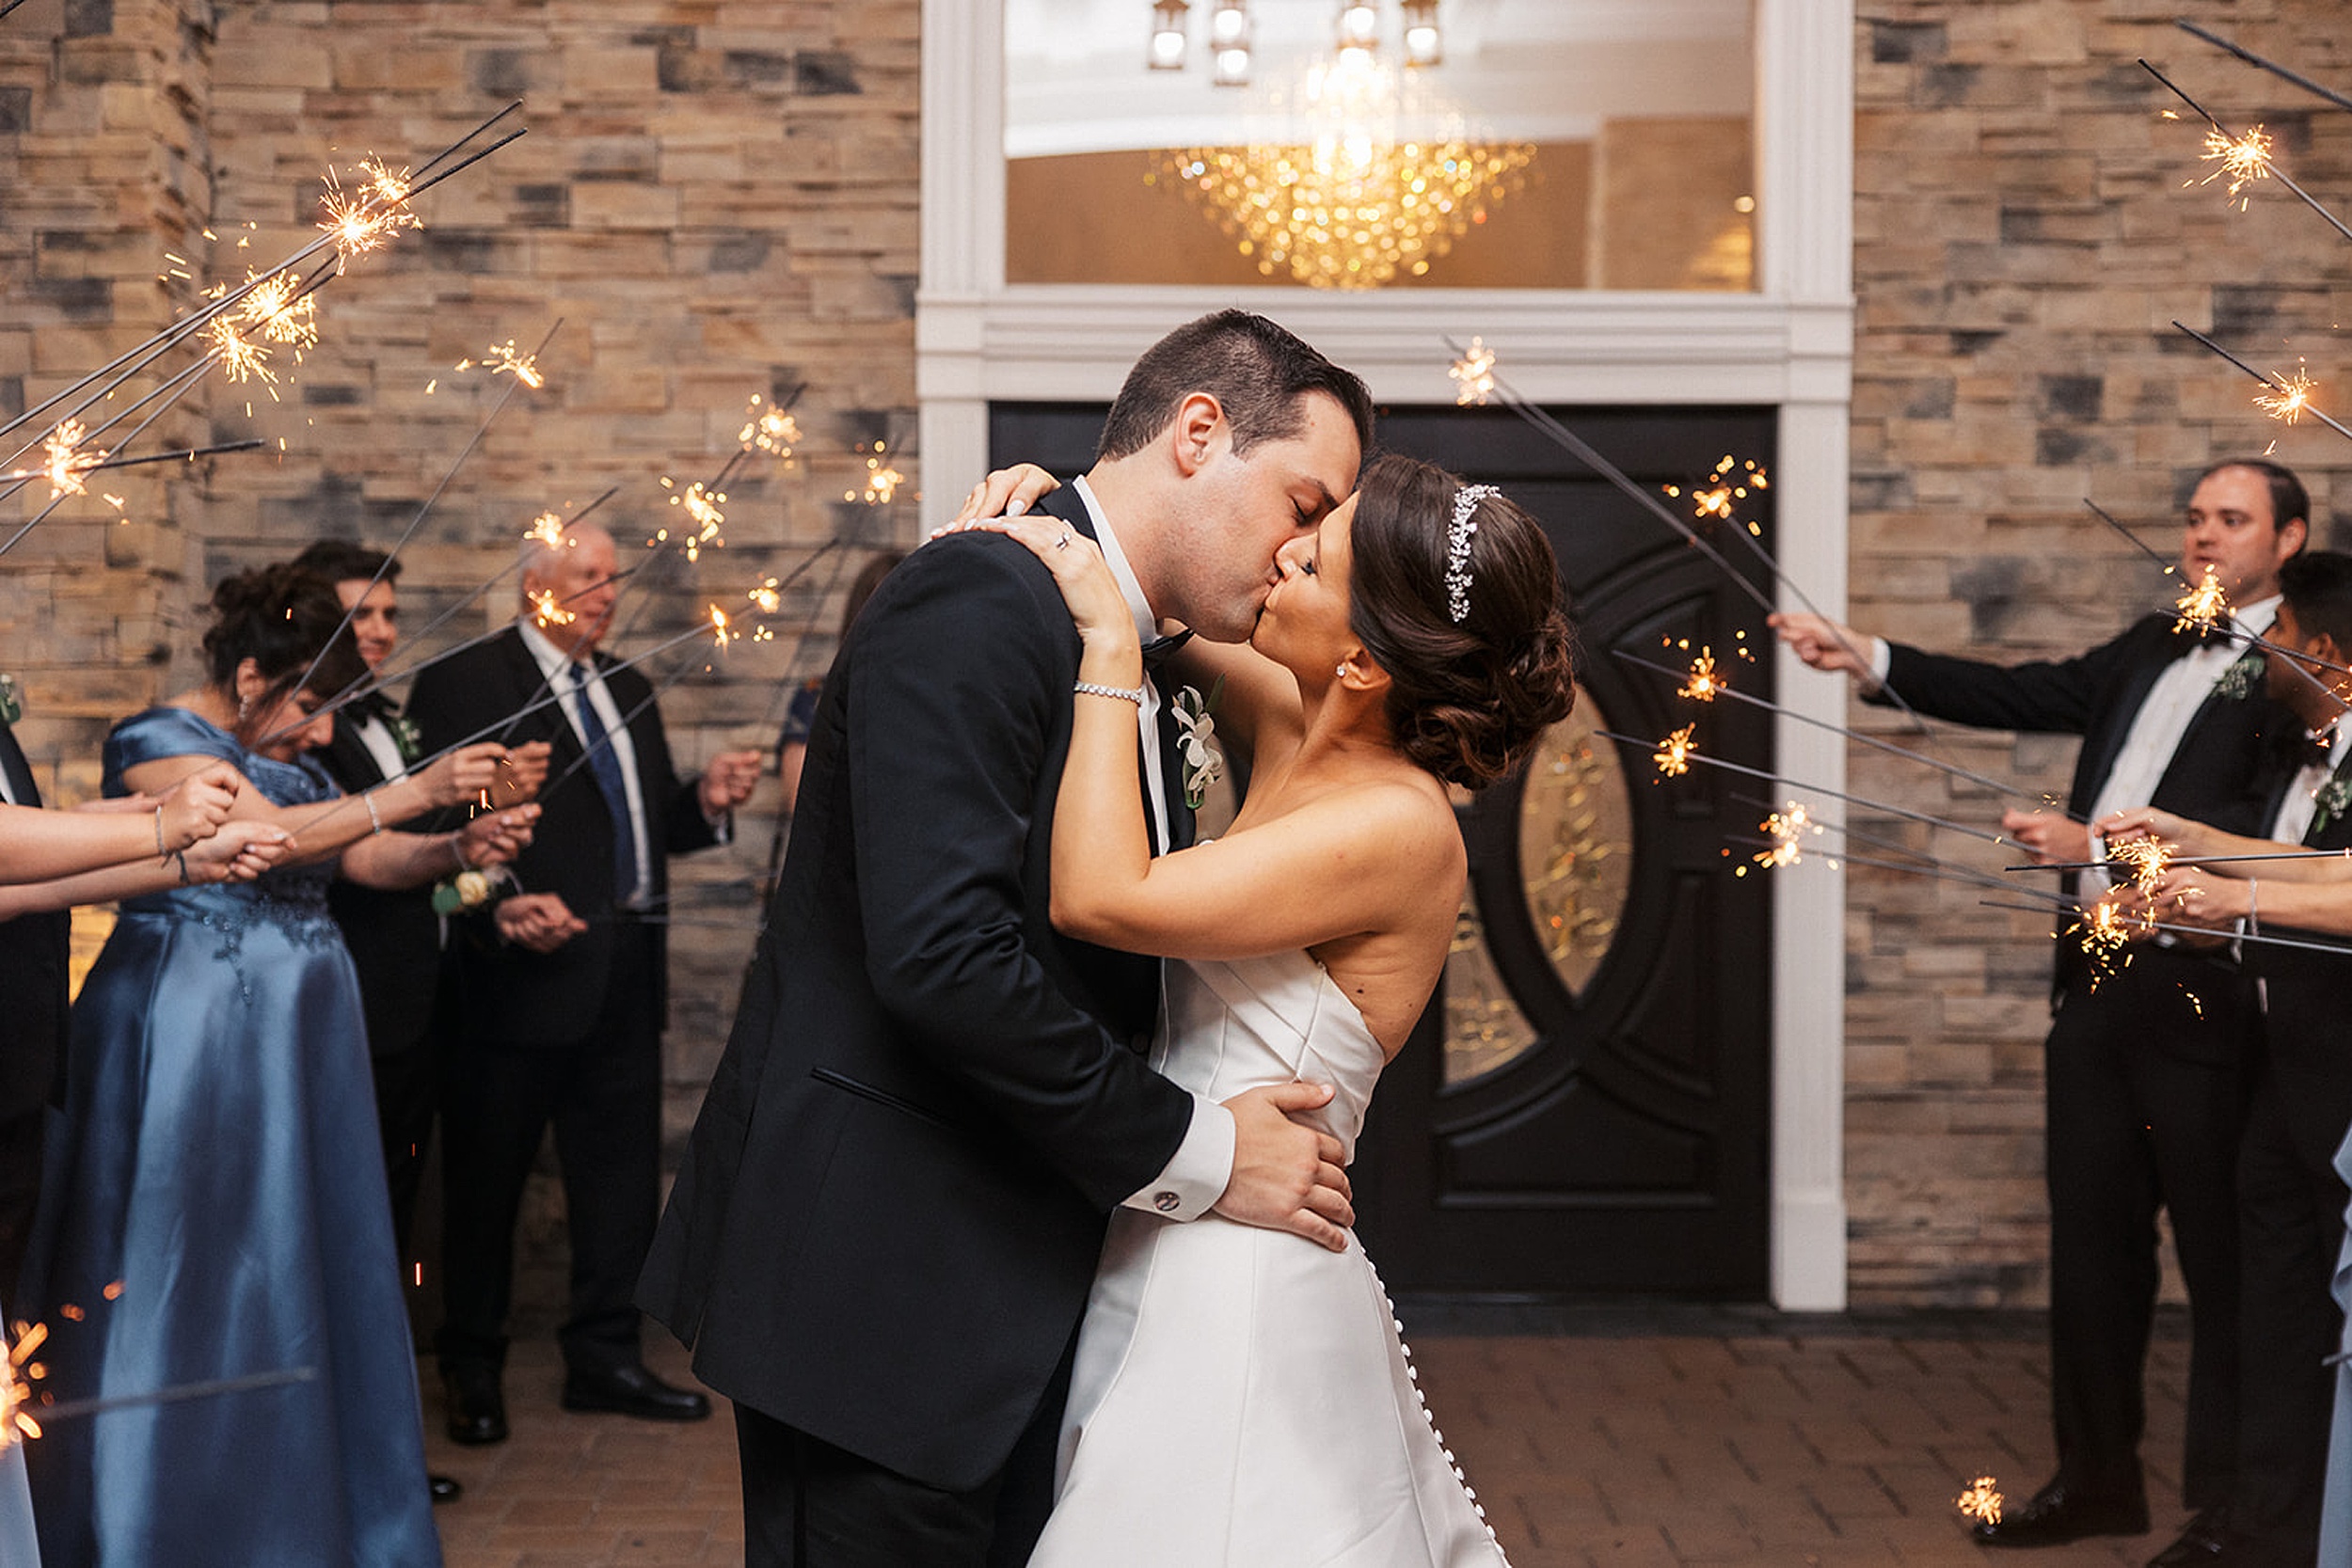 Newlyweds kiss while surrounded by their guests holding sparklers over them at a valley regency wedding